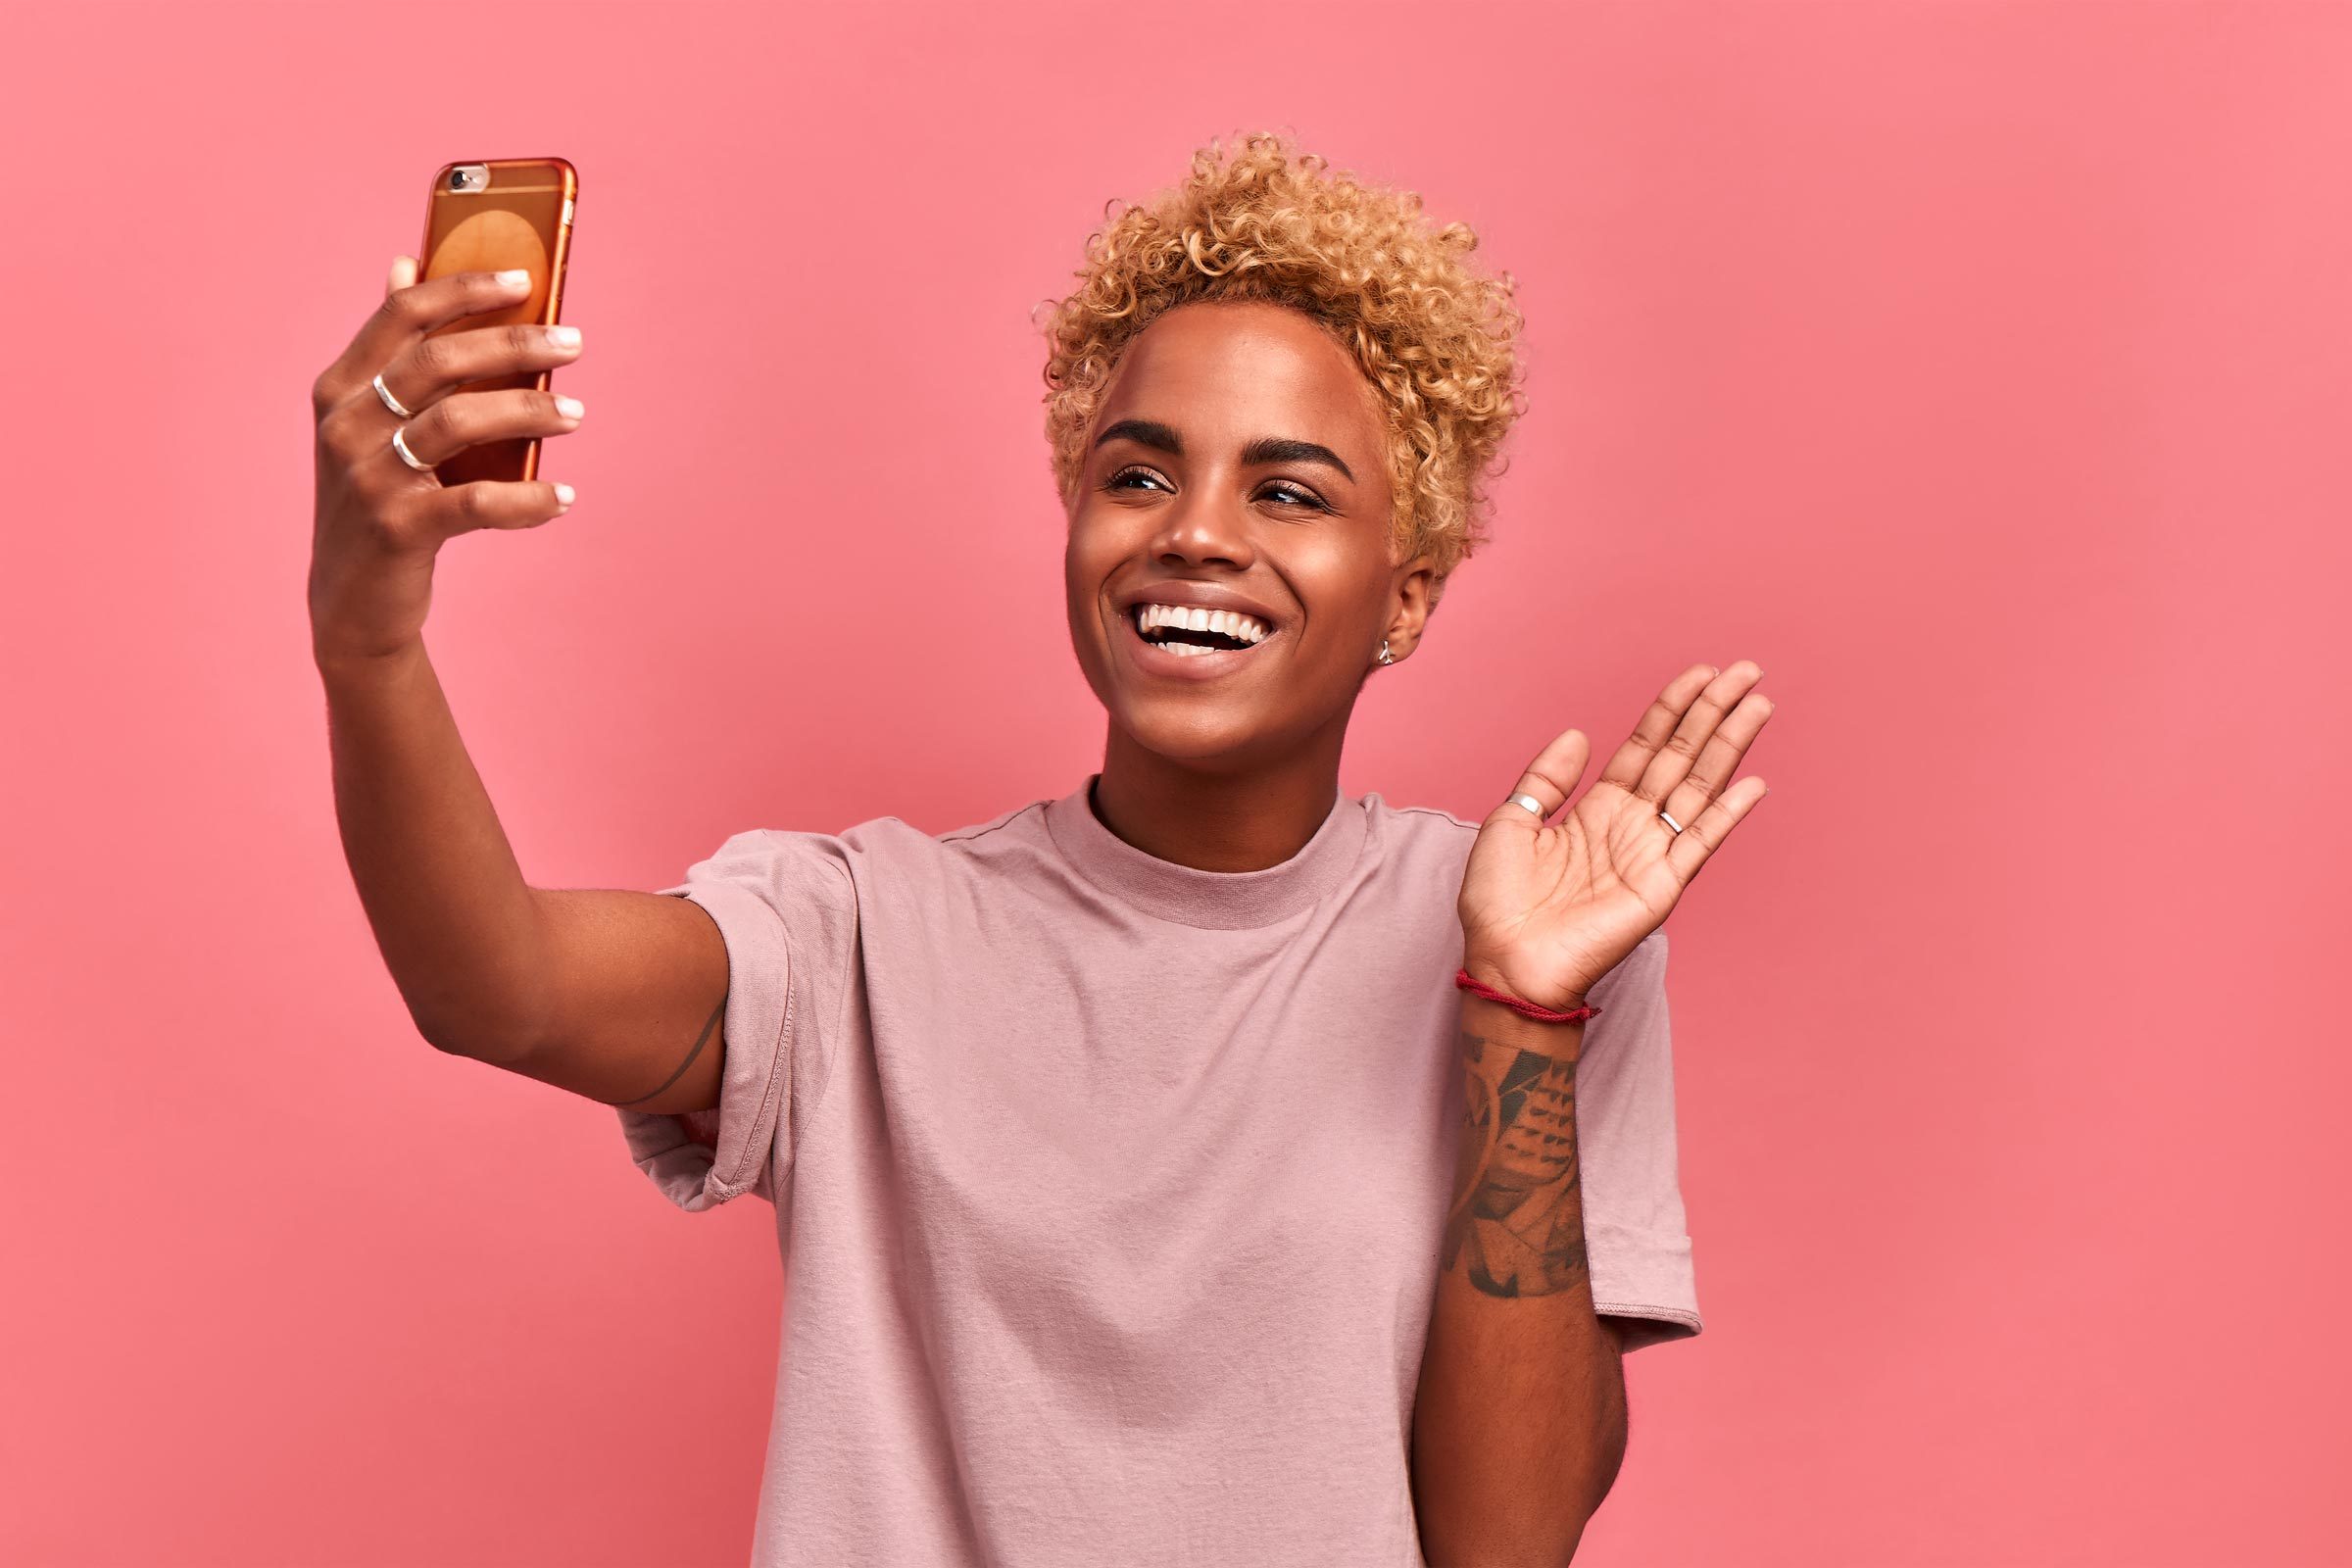 <p>To study the link between social media accounts and personality, researchers asked college students to fill out two surveys: one that looked at their selfie-posting behaviors, and one personality assessment. The results, published in <em>The Journal of Open Psyc</em><em>hology</em> in 2022, were fascinating. The more often someone posted <a href="https://www.rd.com/list/how-to-take-a-selfie/">selfies</a>, the less emotionally stable they were and the lower their self-esteem. However, frequent selfie-takers were also more likely to be extroverted and value relationships with others. The younger the person, the more pronounced these effects were, the researchers added.</p>